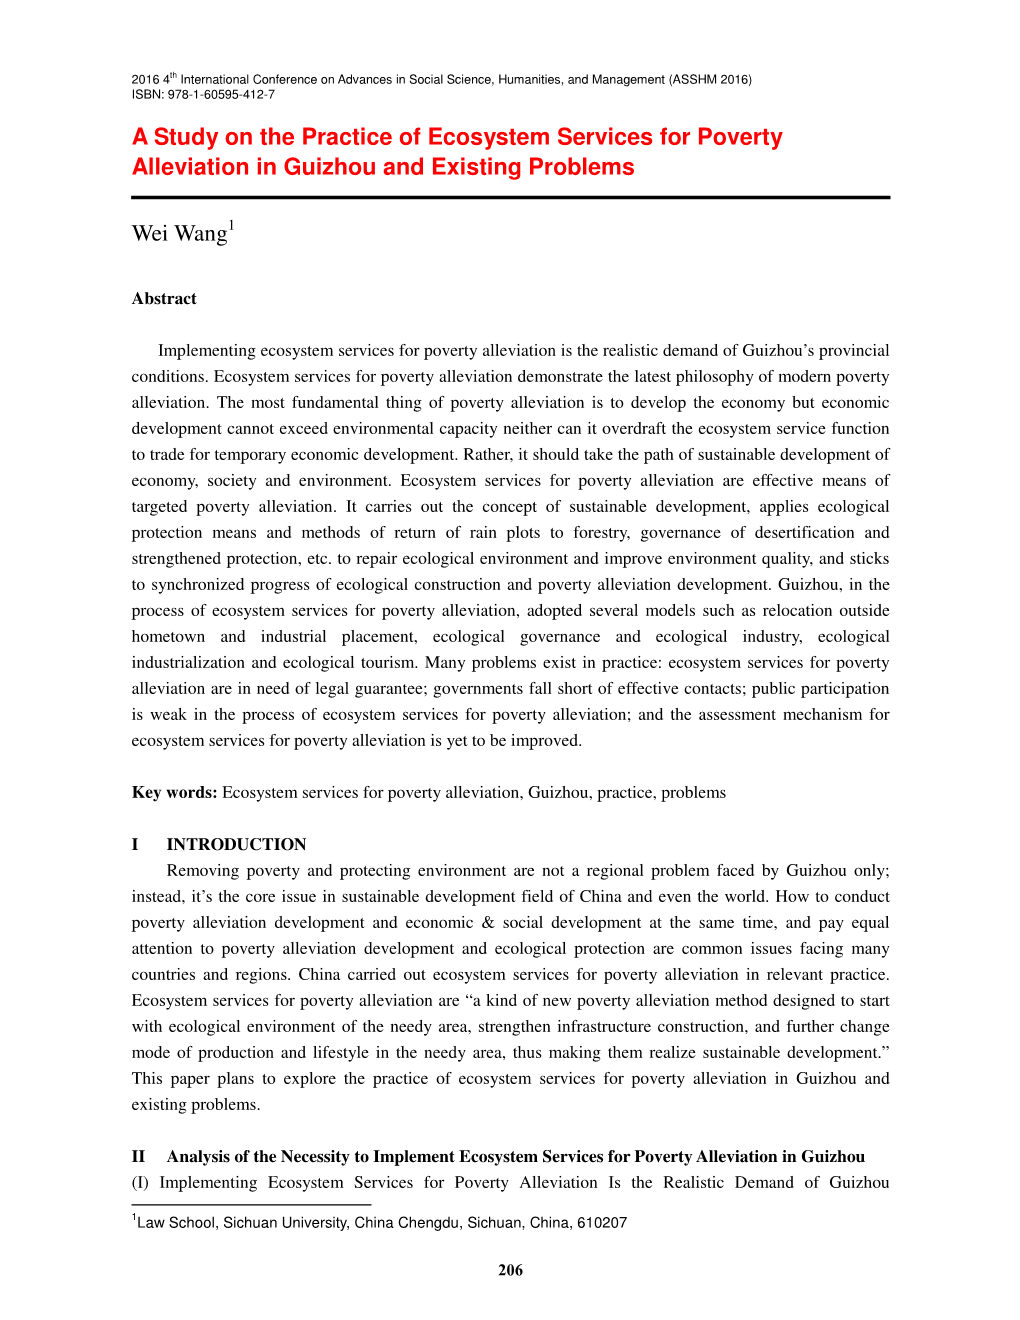 A Study on the Practice of Ecosystem Services for Poverty Alleviation in Guizhou and Existing Problems